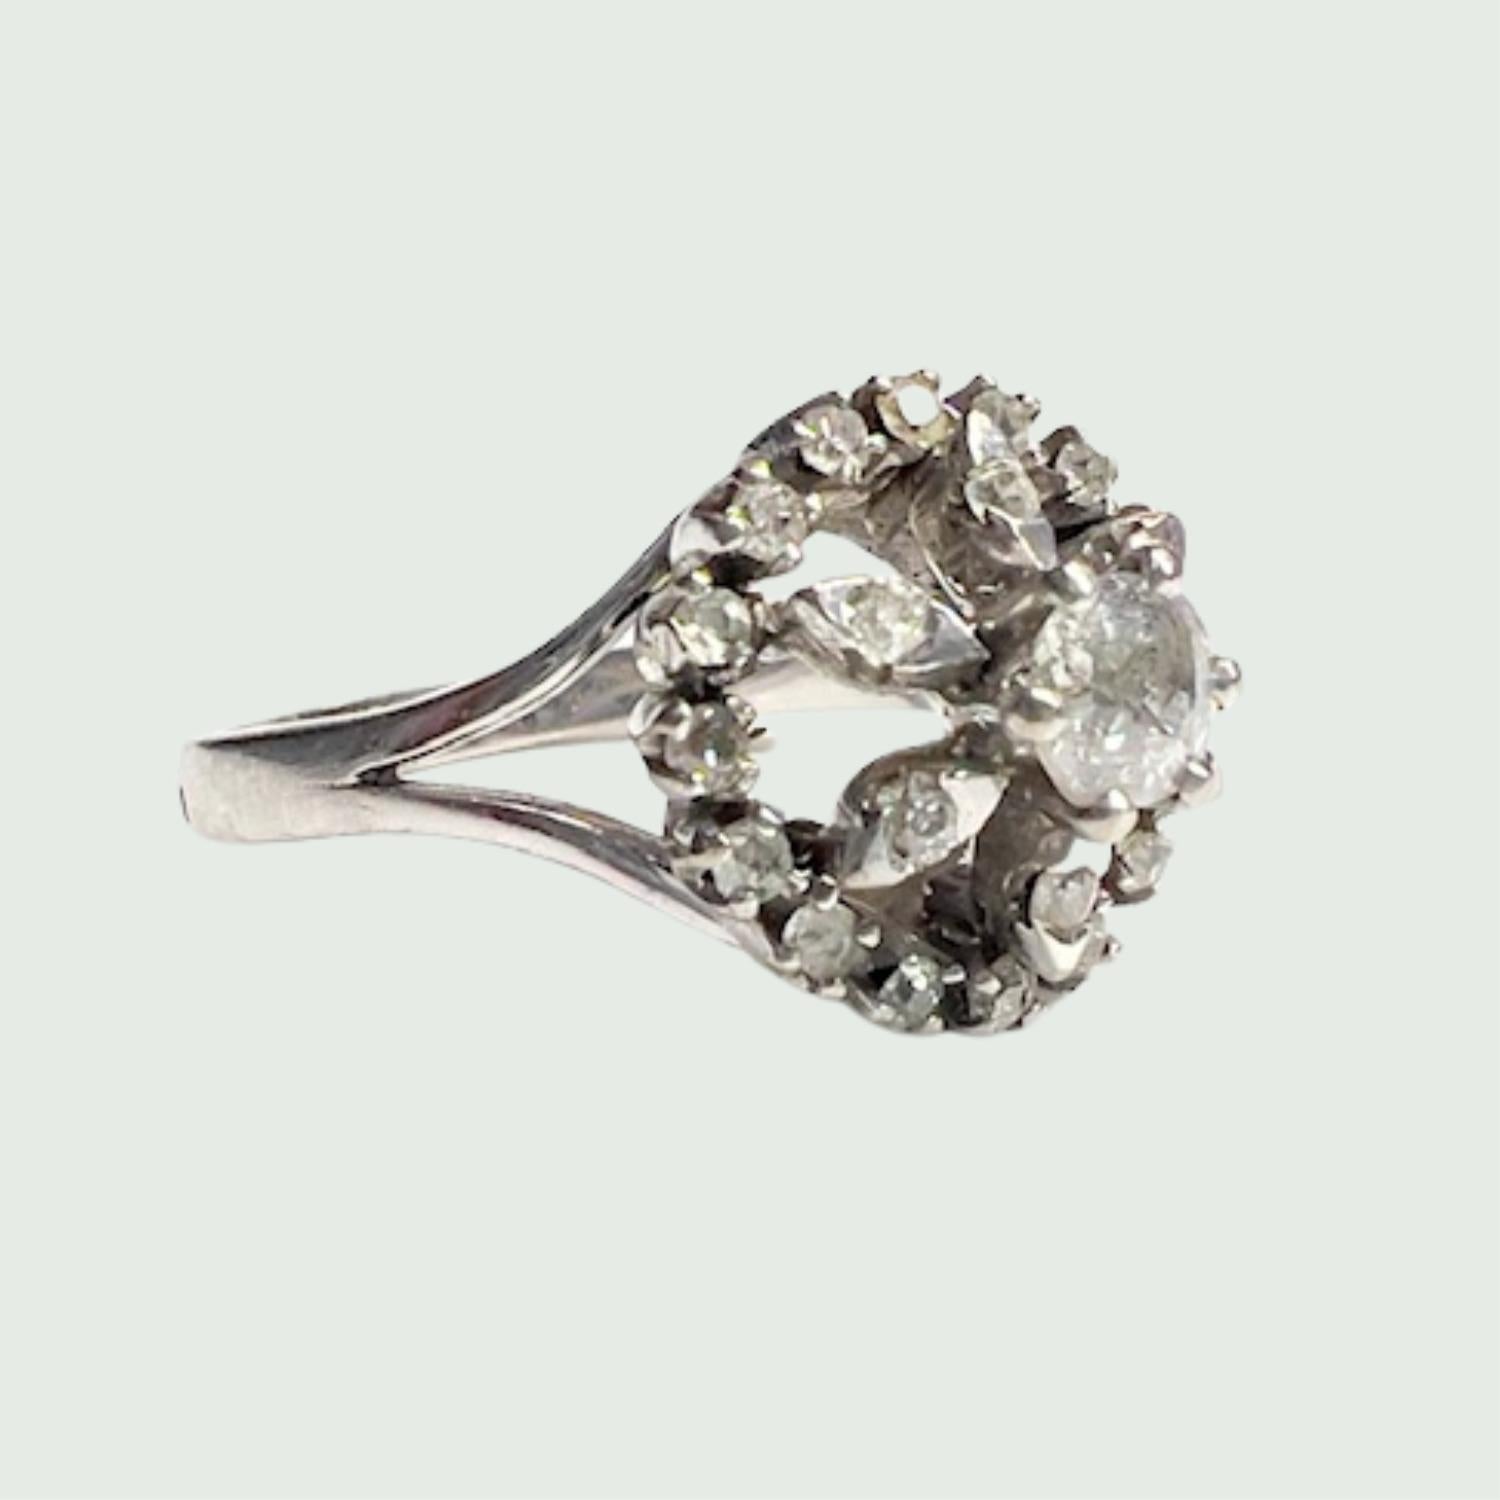 Introducing a truly exceptional piece: the Retro Design Ring featuring a vintage Rosette from the 1945-1950 era, meticulously crafted in 18k white gold. Adorned with brilliant-cut diamonds totaling 1.70 carats, this ring radiates and